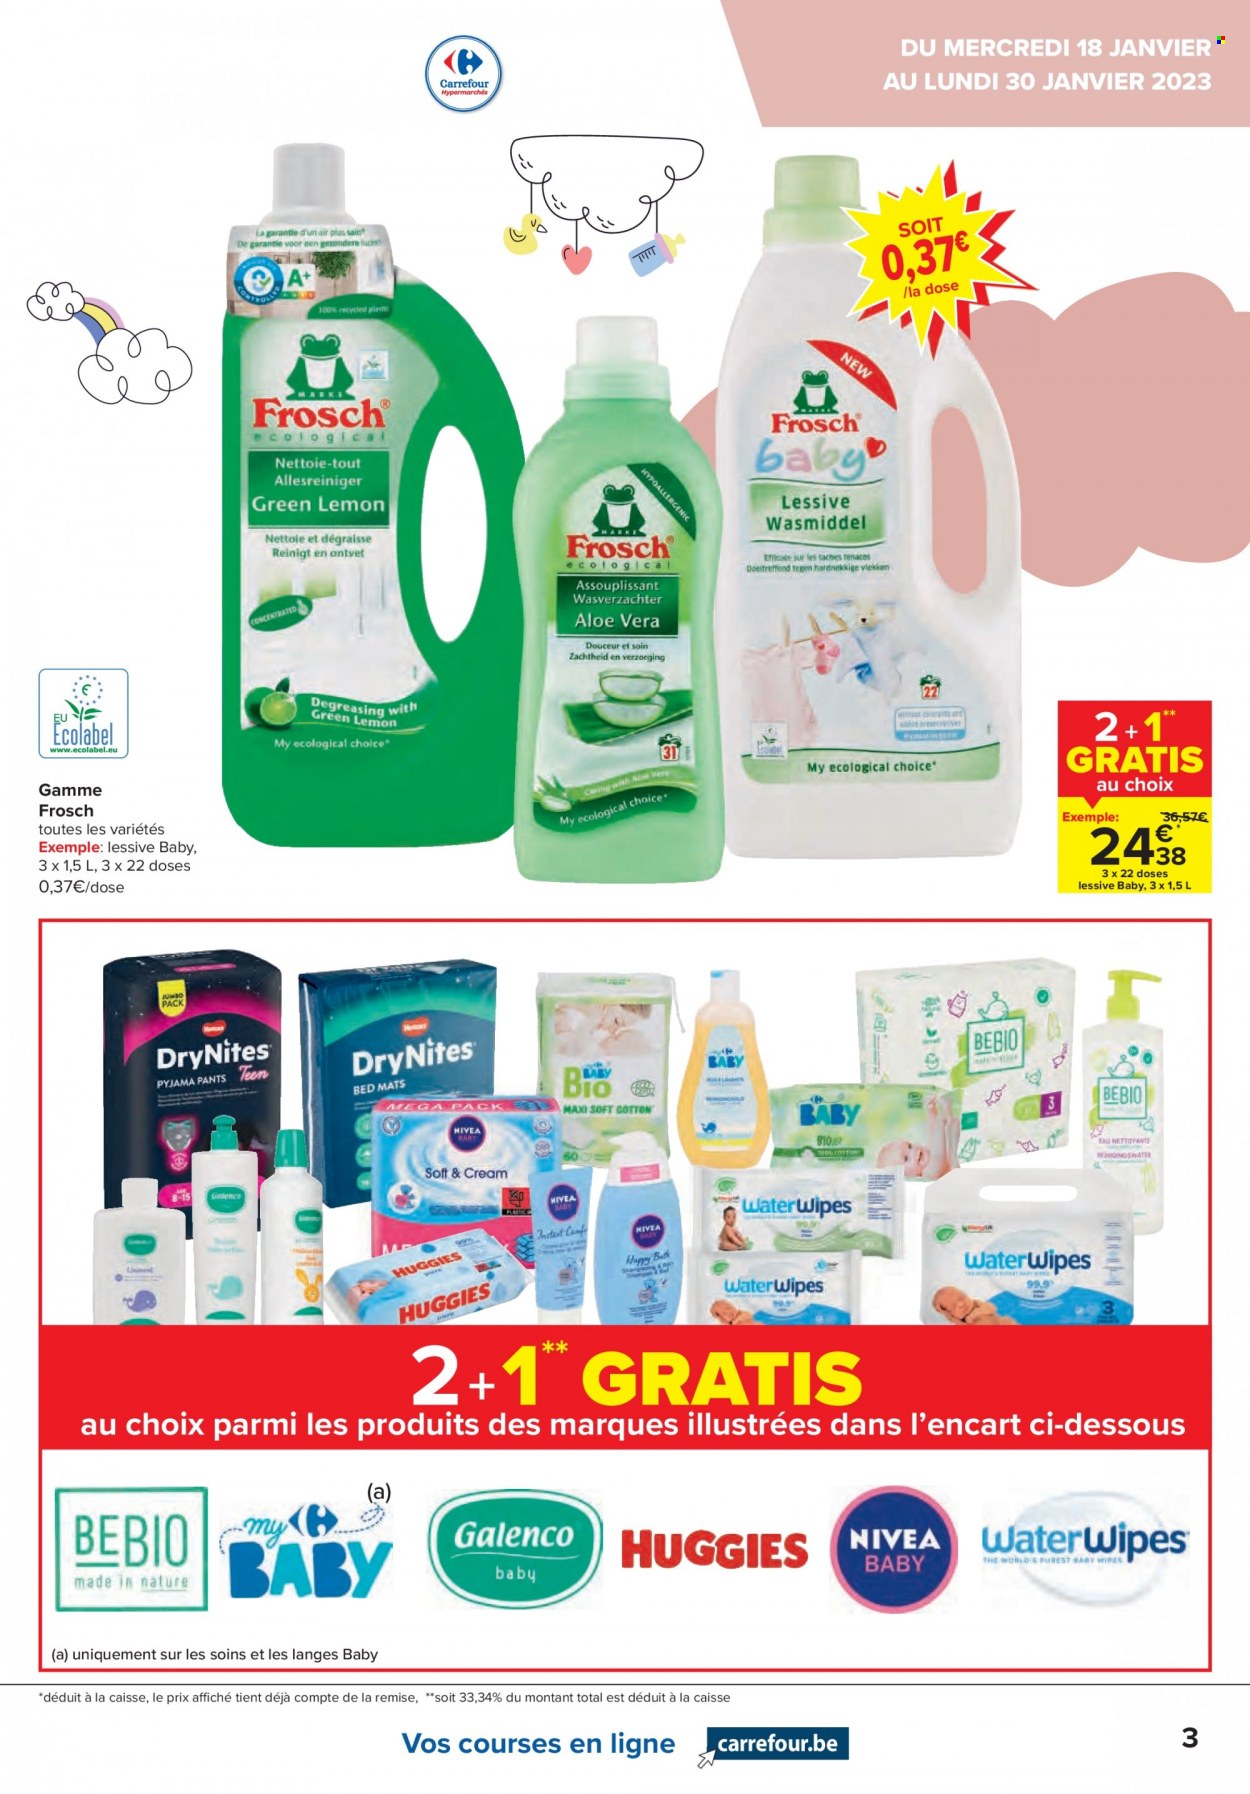 Catalogue Carrefour hypermarkt - 18.1.2023 - 30.1.2023. Page 3.